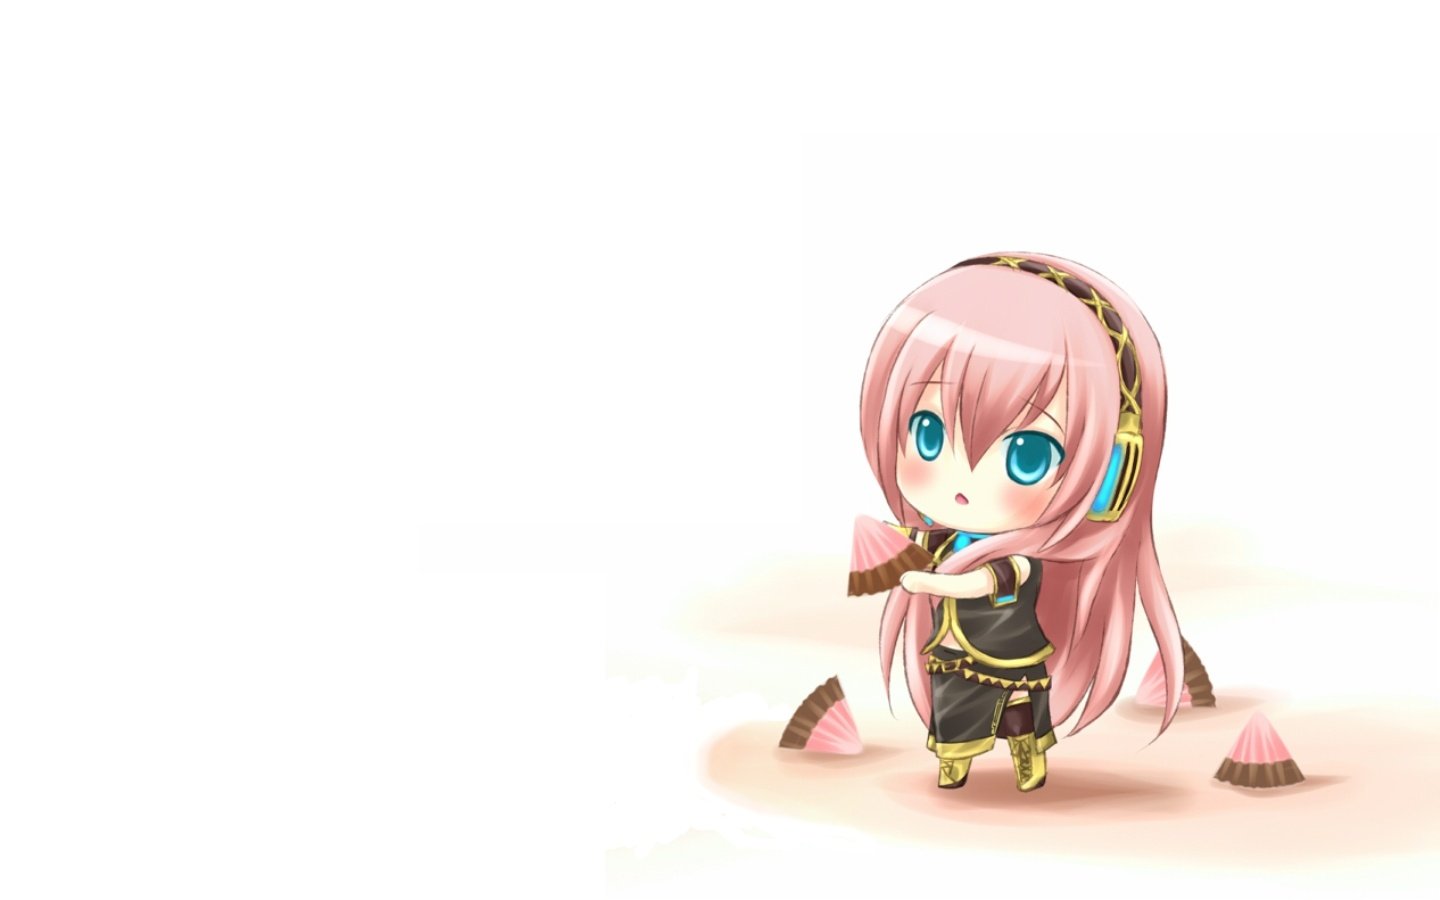 Anime Chibi Vocaloid Cool Wallpapers I HD Images 1440x900